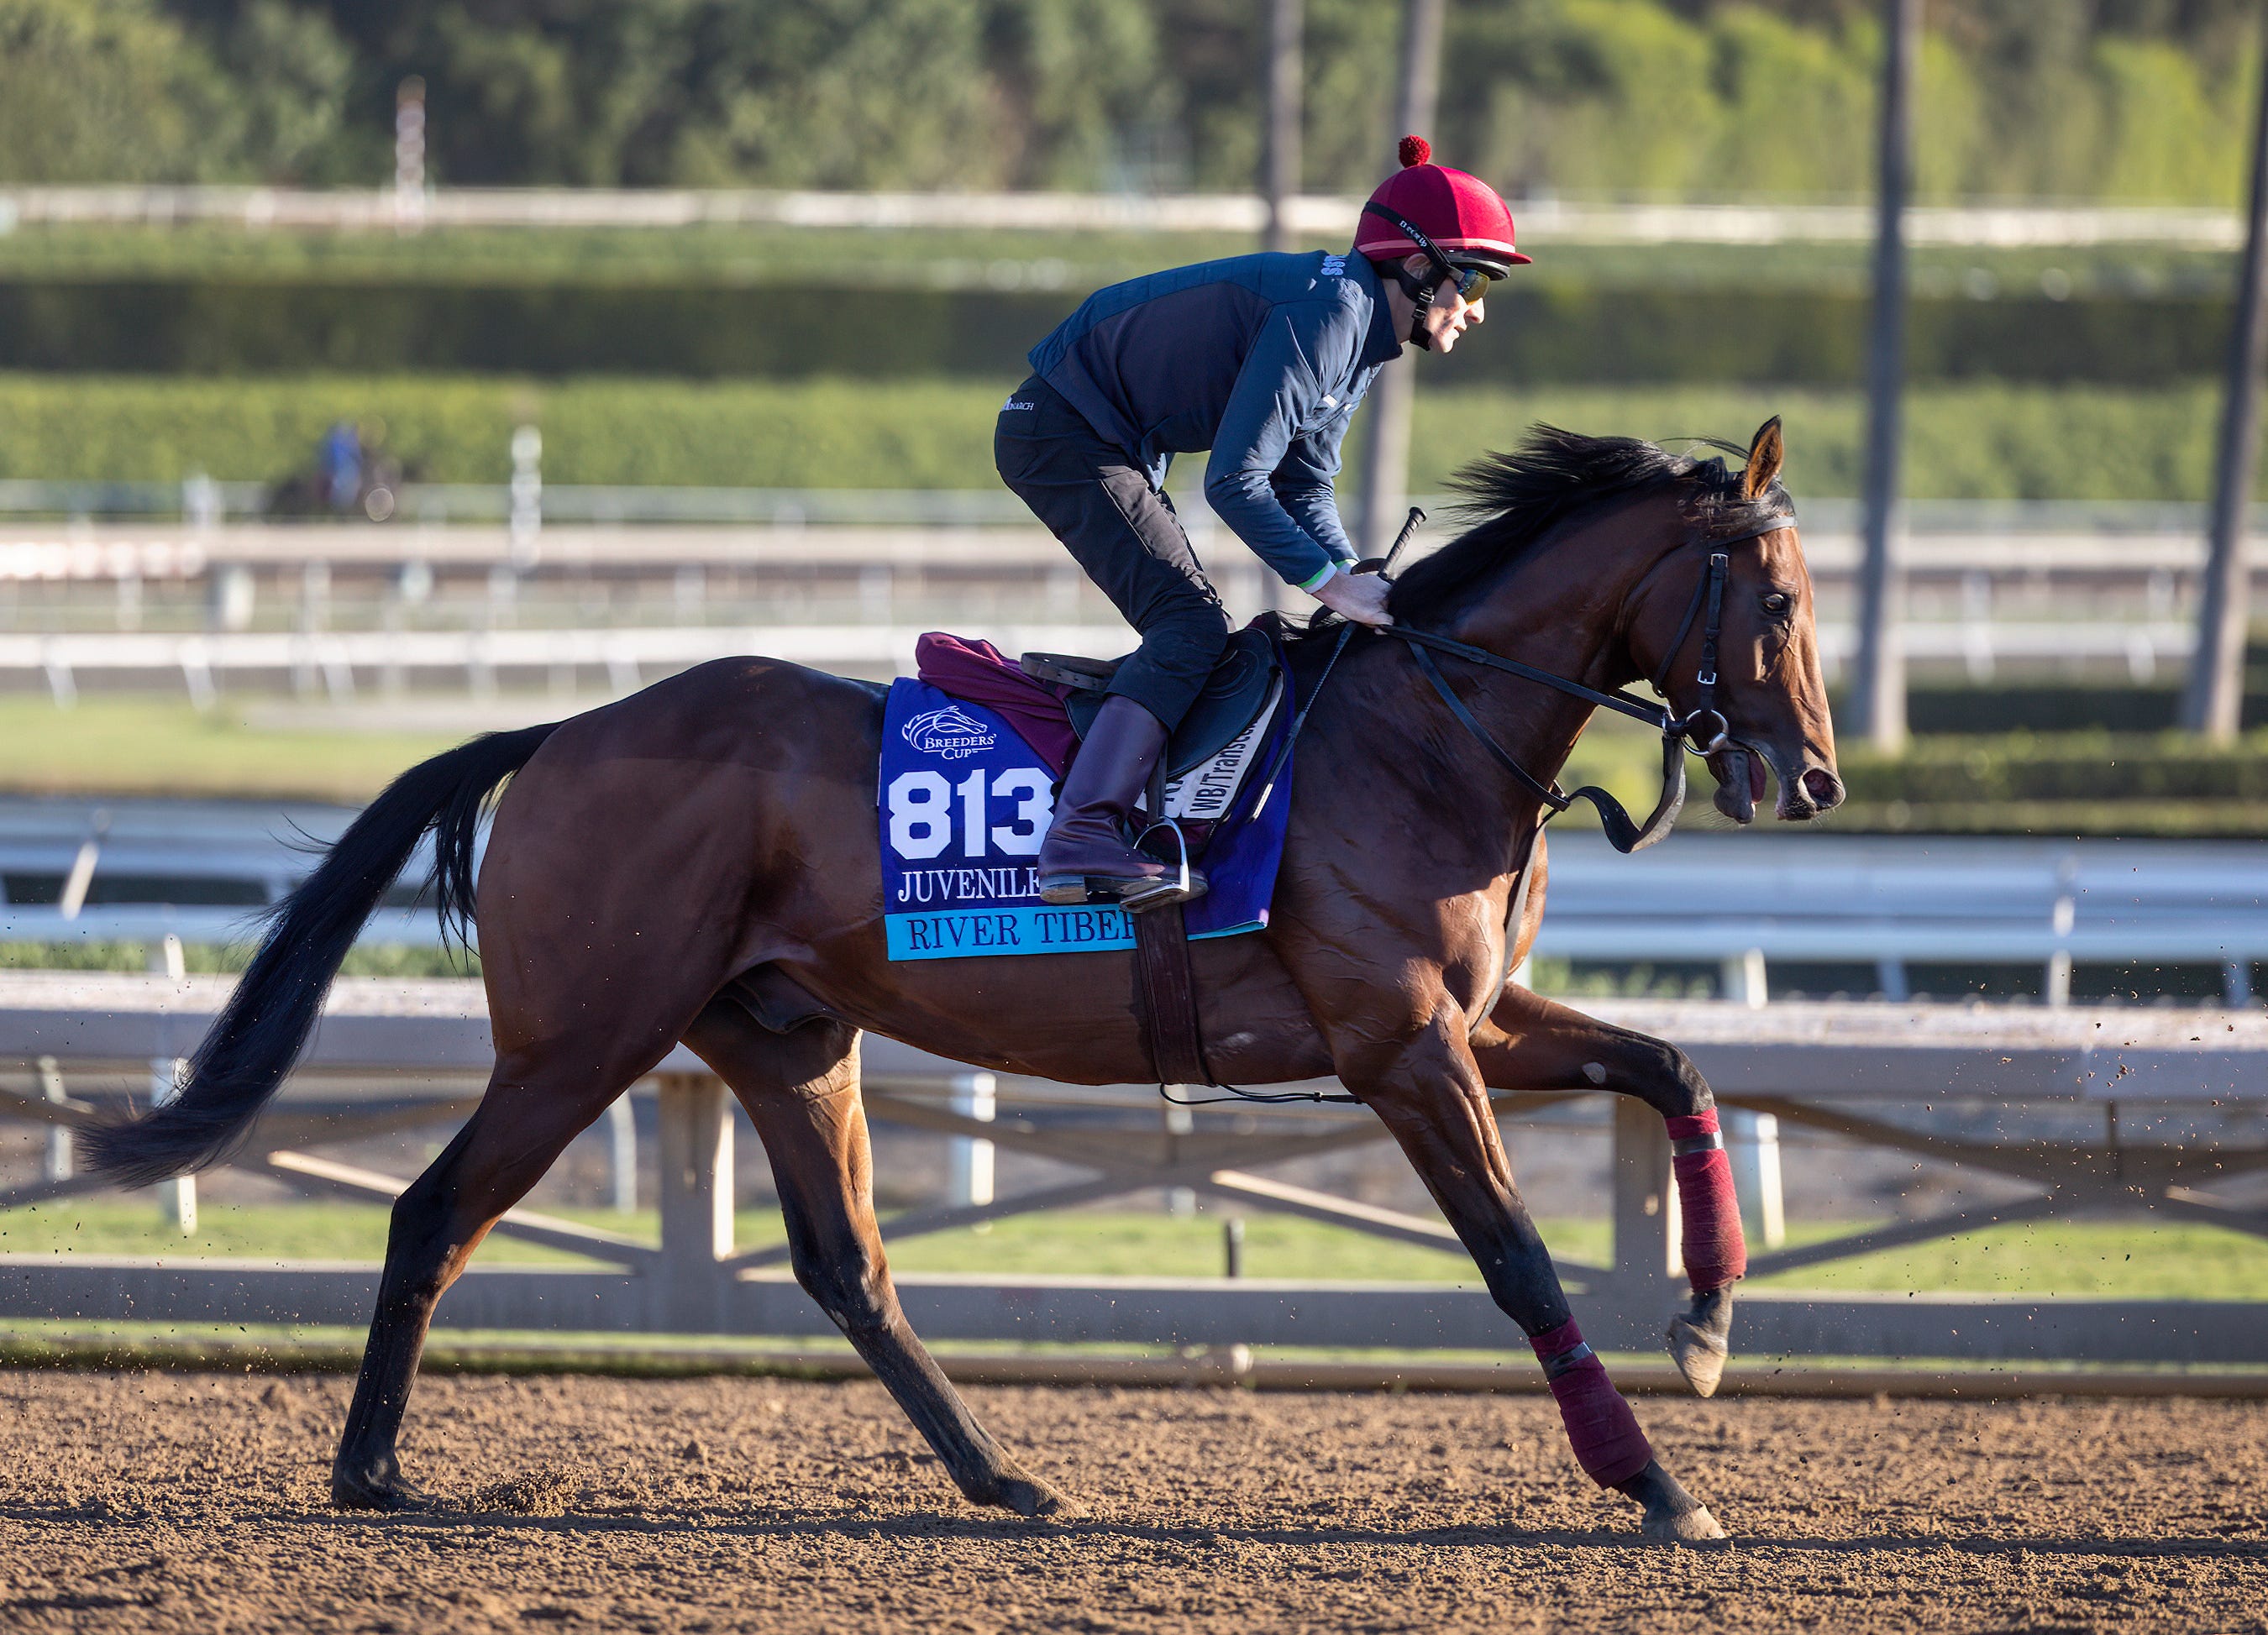 Breeders' Cup Juvenile Turf Moore's mount choice may be tipoff to winner